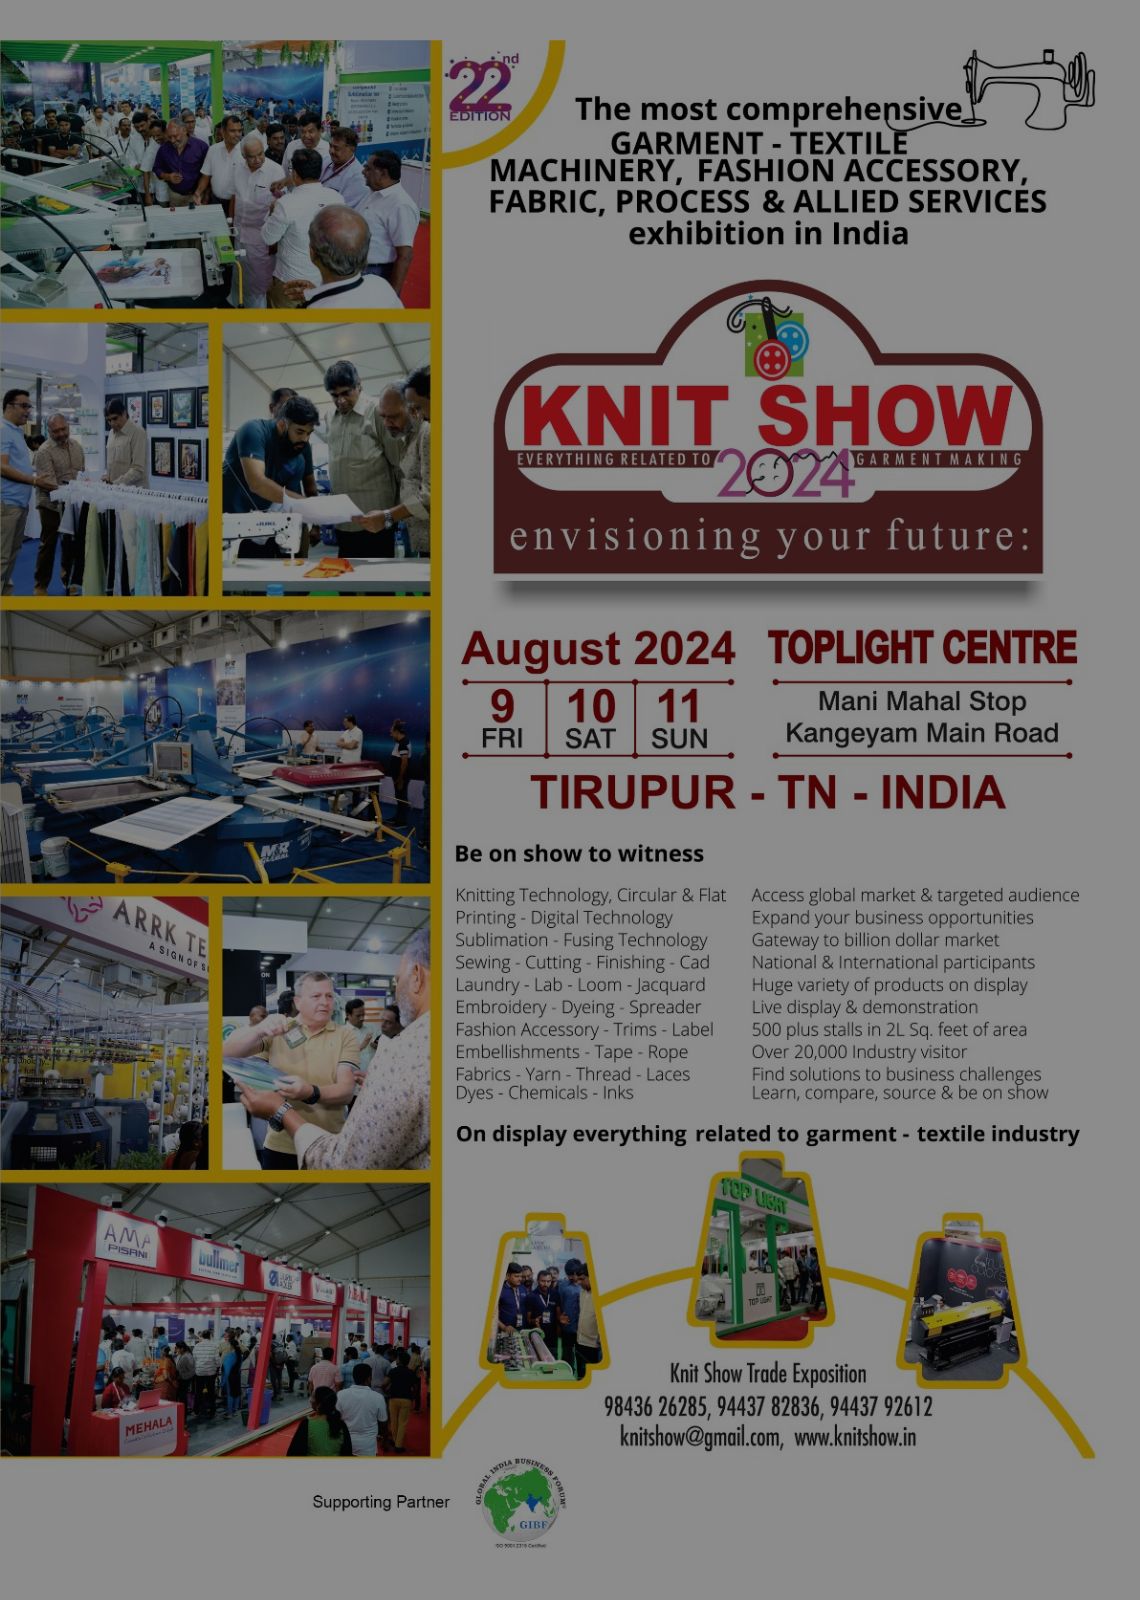 GIBF Collabrative Upcoming Event -  Knit Show 2024